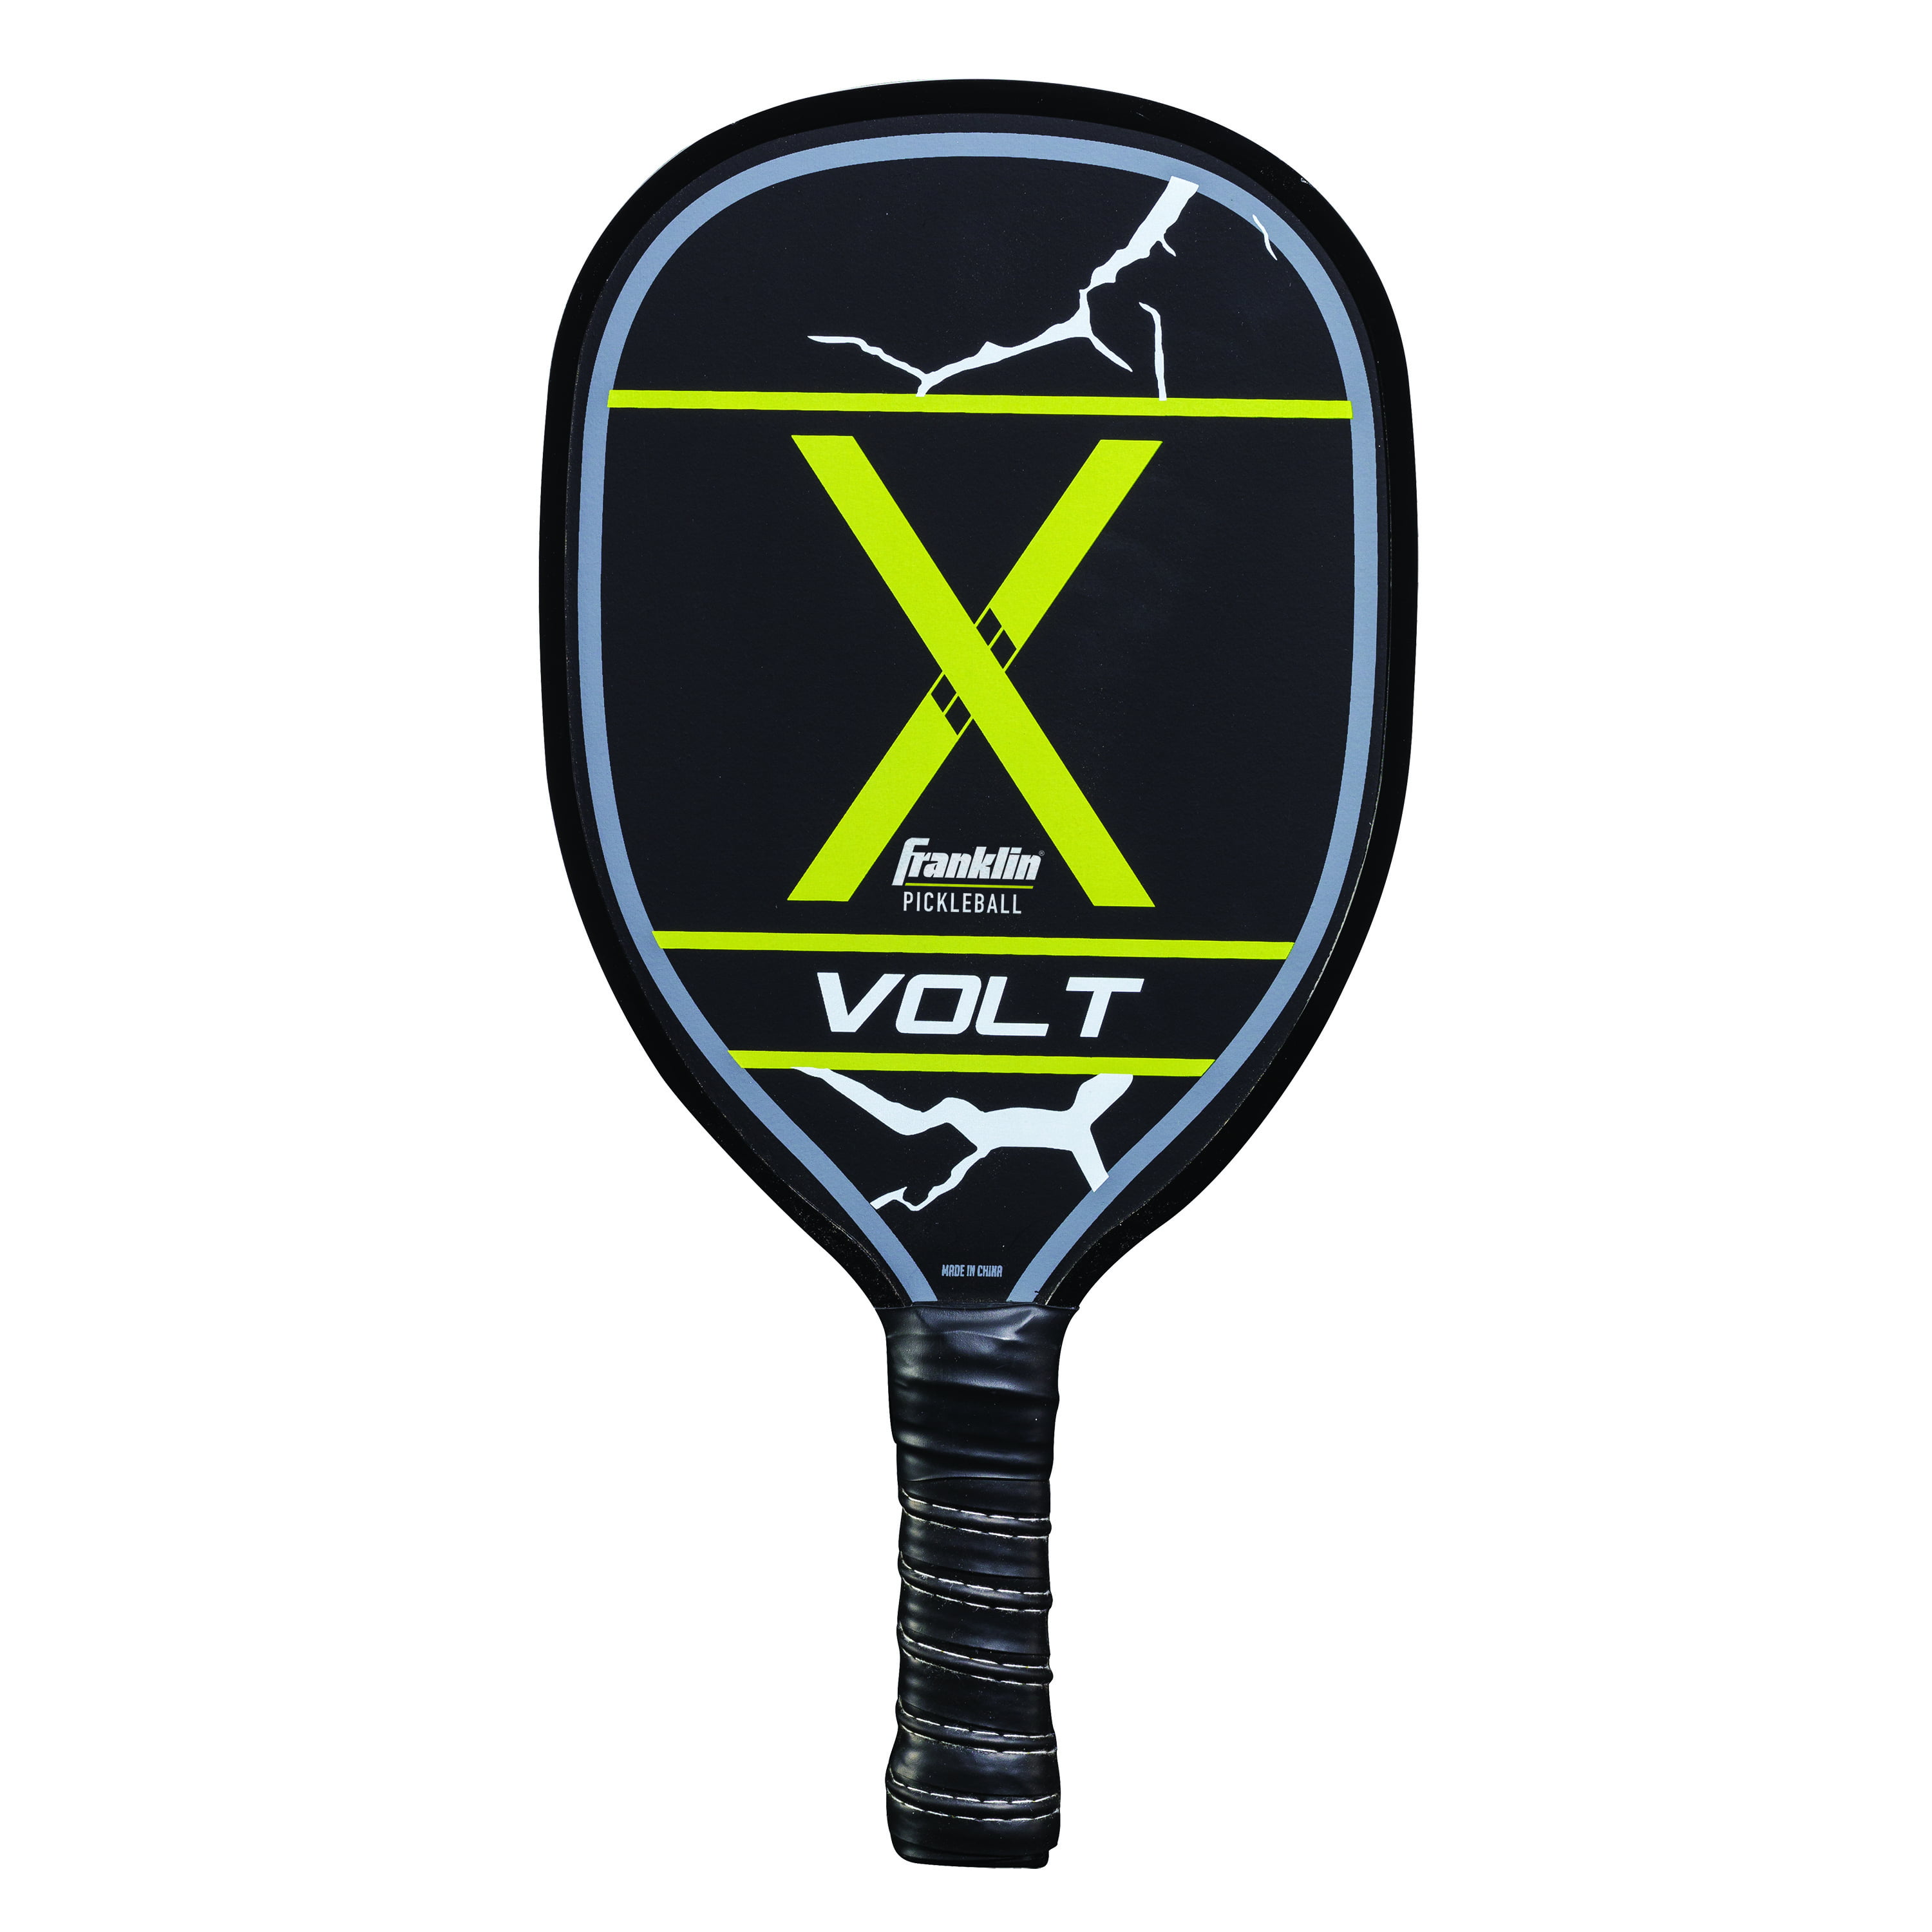 Pickleball-X Franklin Sports Volt Wooden Pickleball Paddle with Padded Handle 